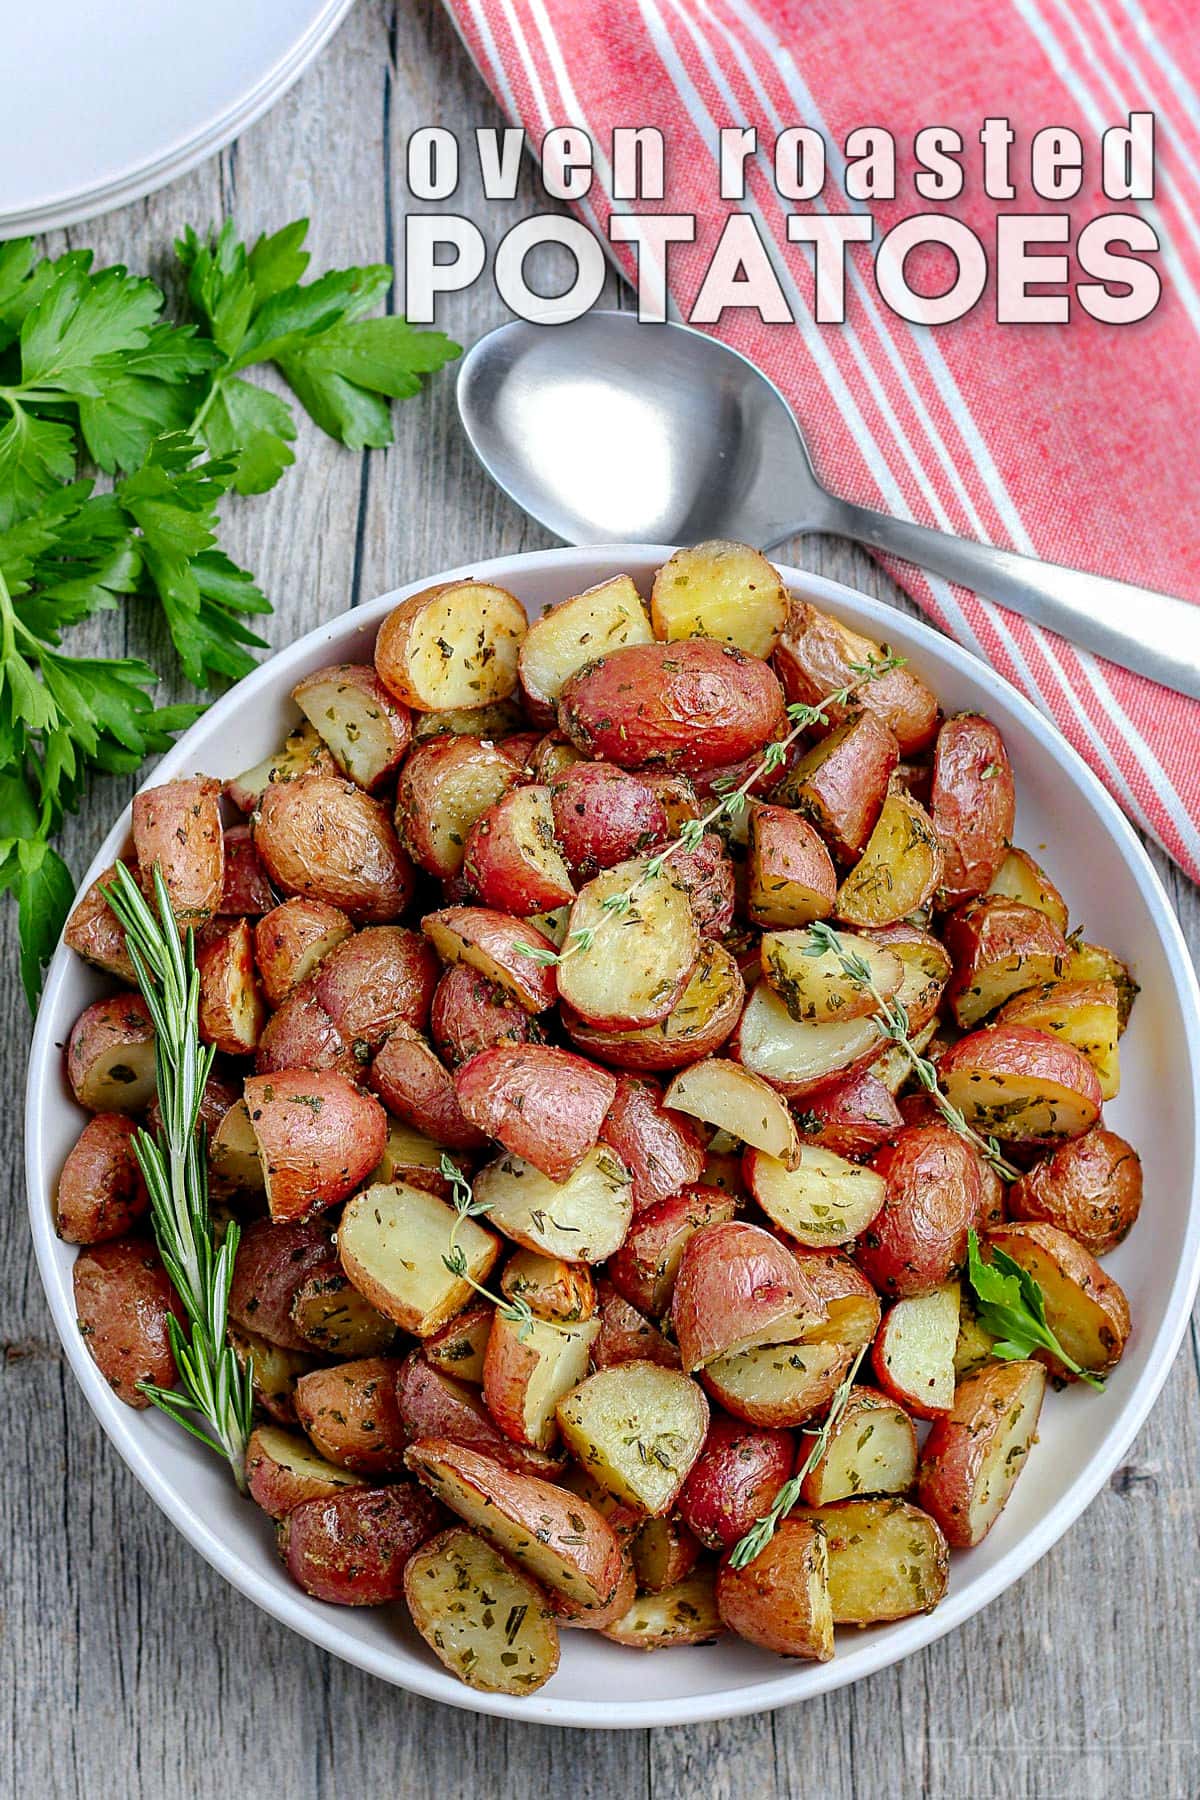 white plate with roasted potatoes garnished with fresh herbs and red towel in the upper right corner white text overlay